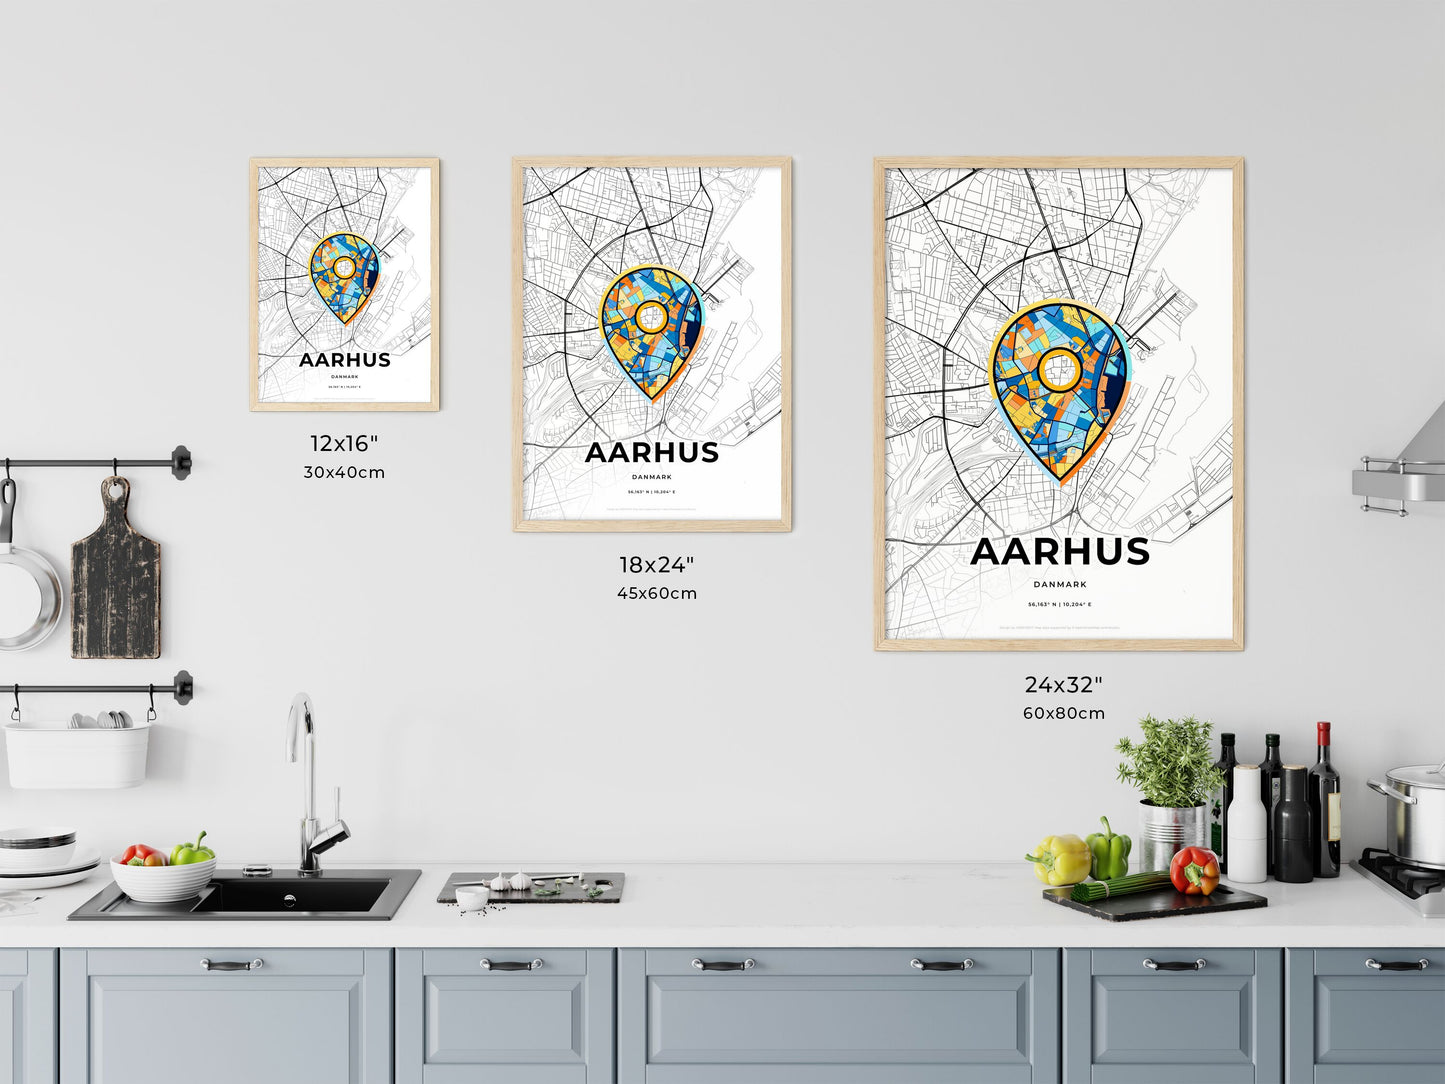 AARHUS DENMARK minimal art map with a colorful icon. Where it all began, Couple map gift.